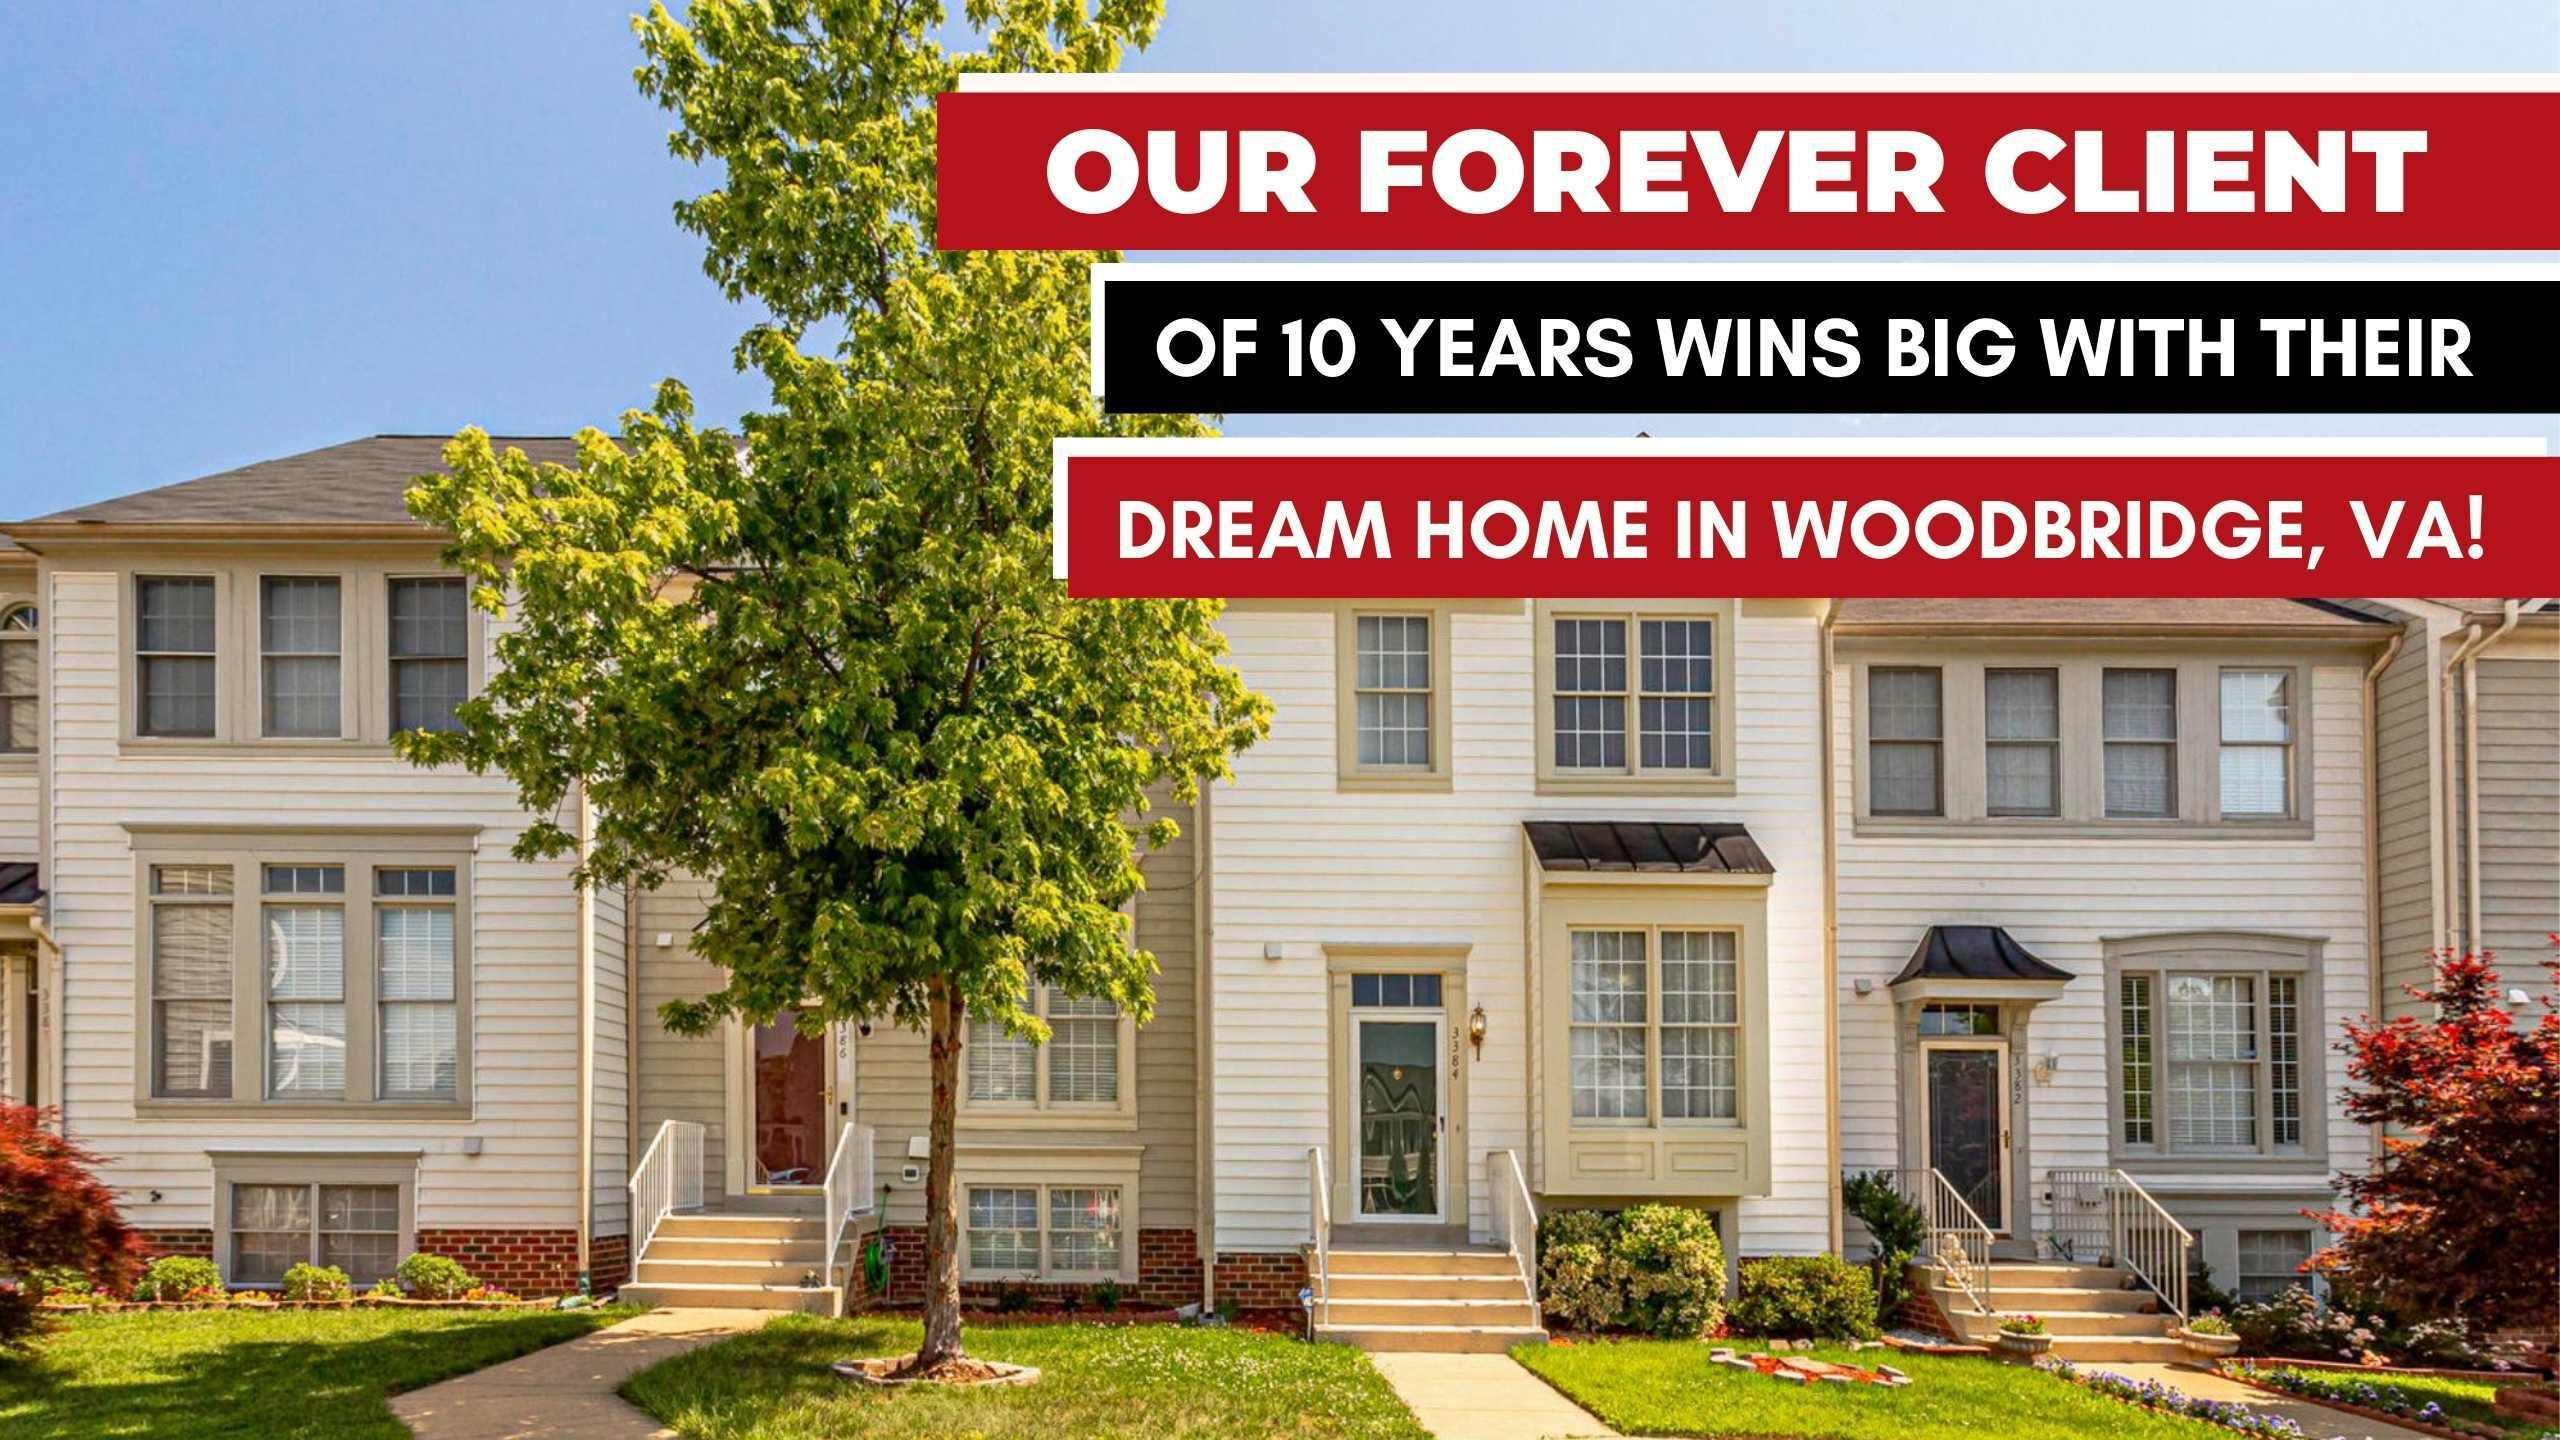 Our Forever Client of 10 Years Wins BIG with their Dream Home in Woodbridge, VA!